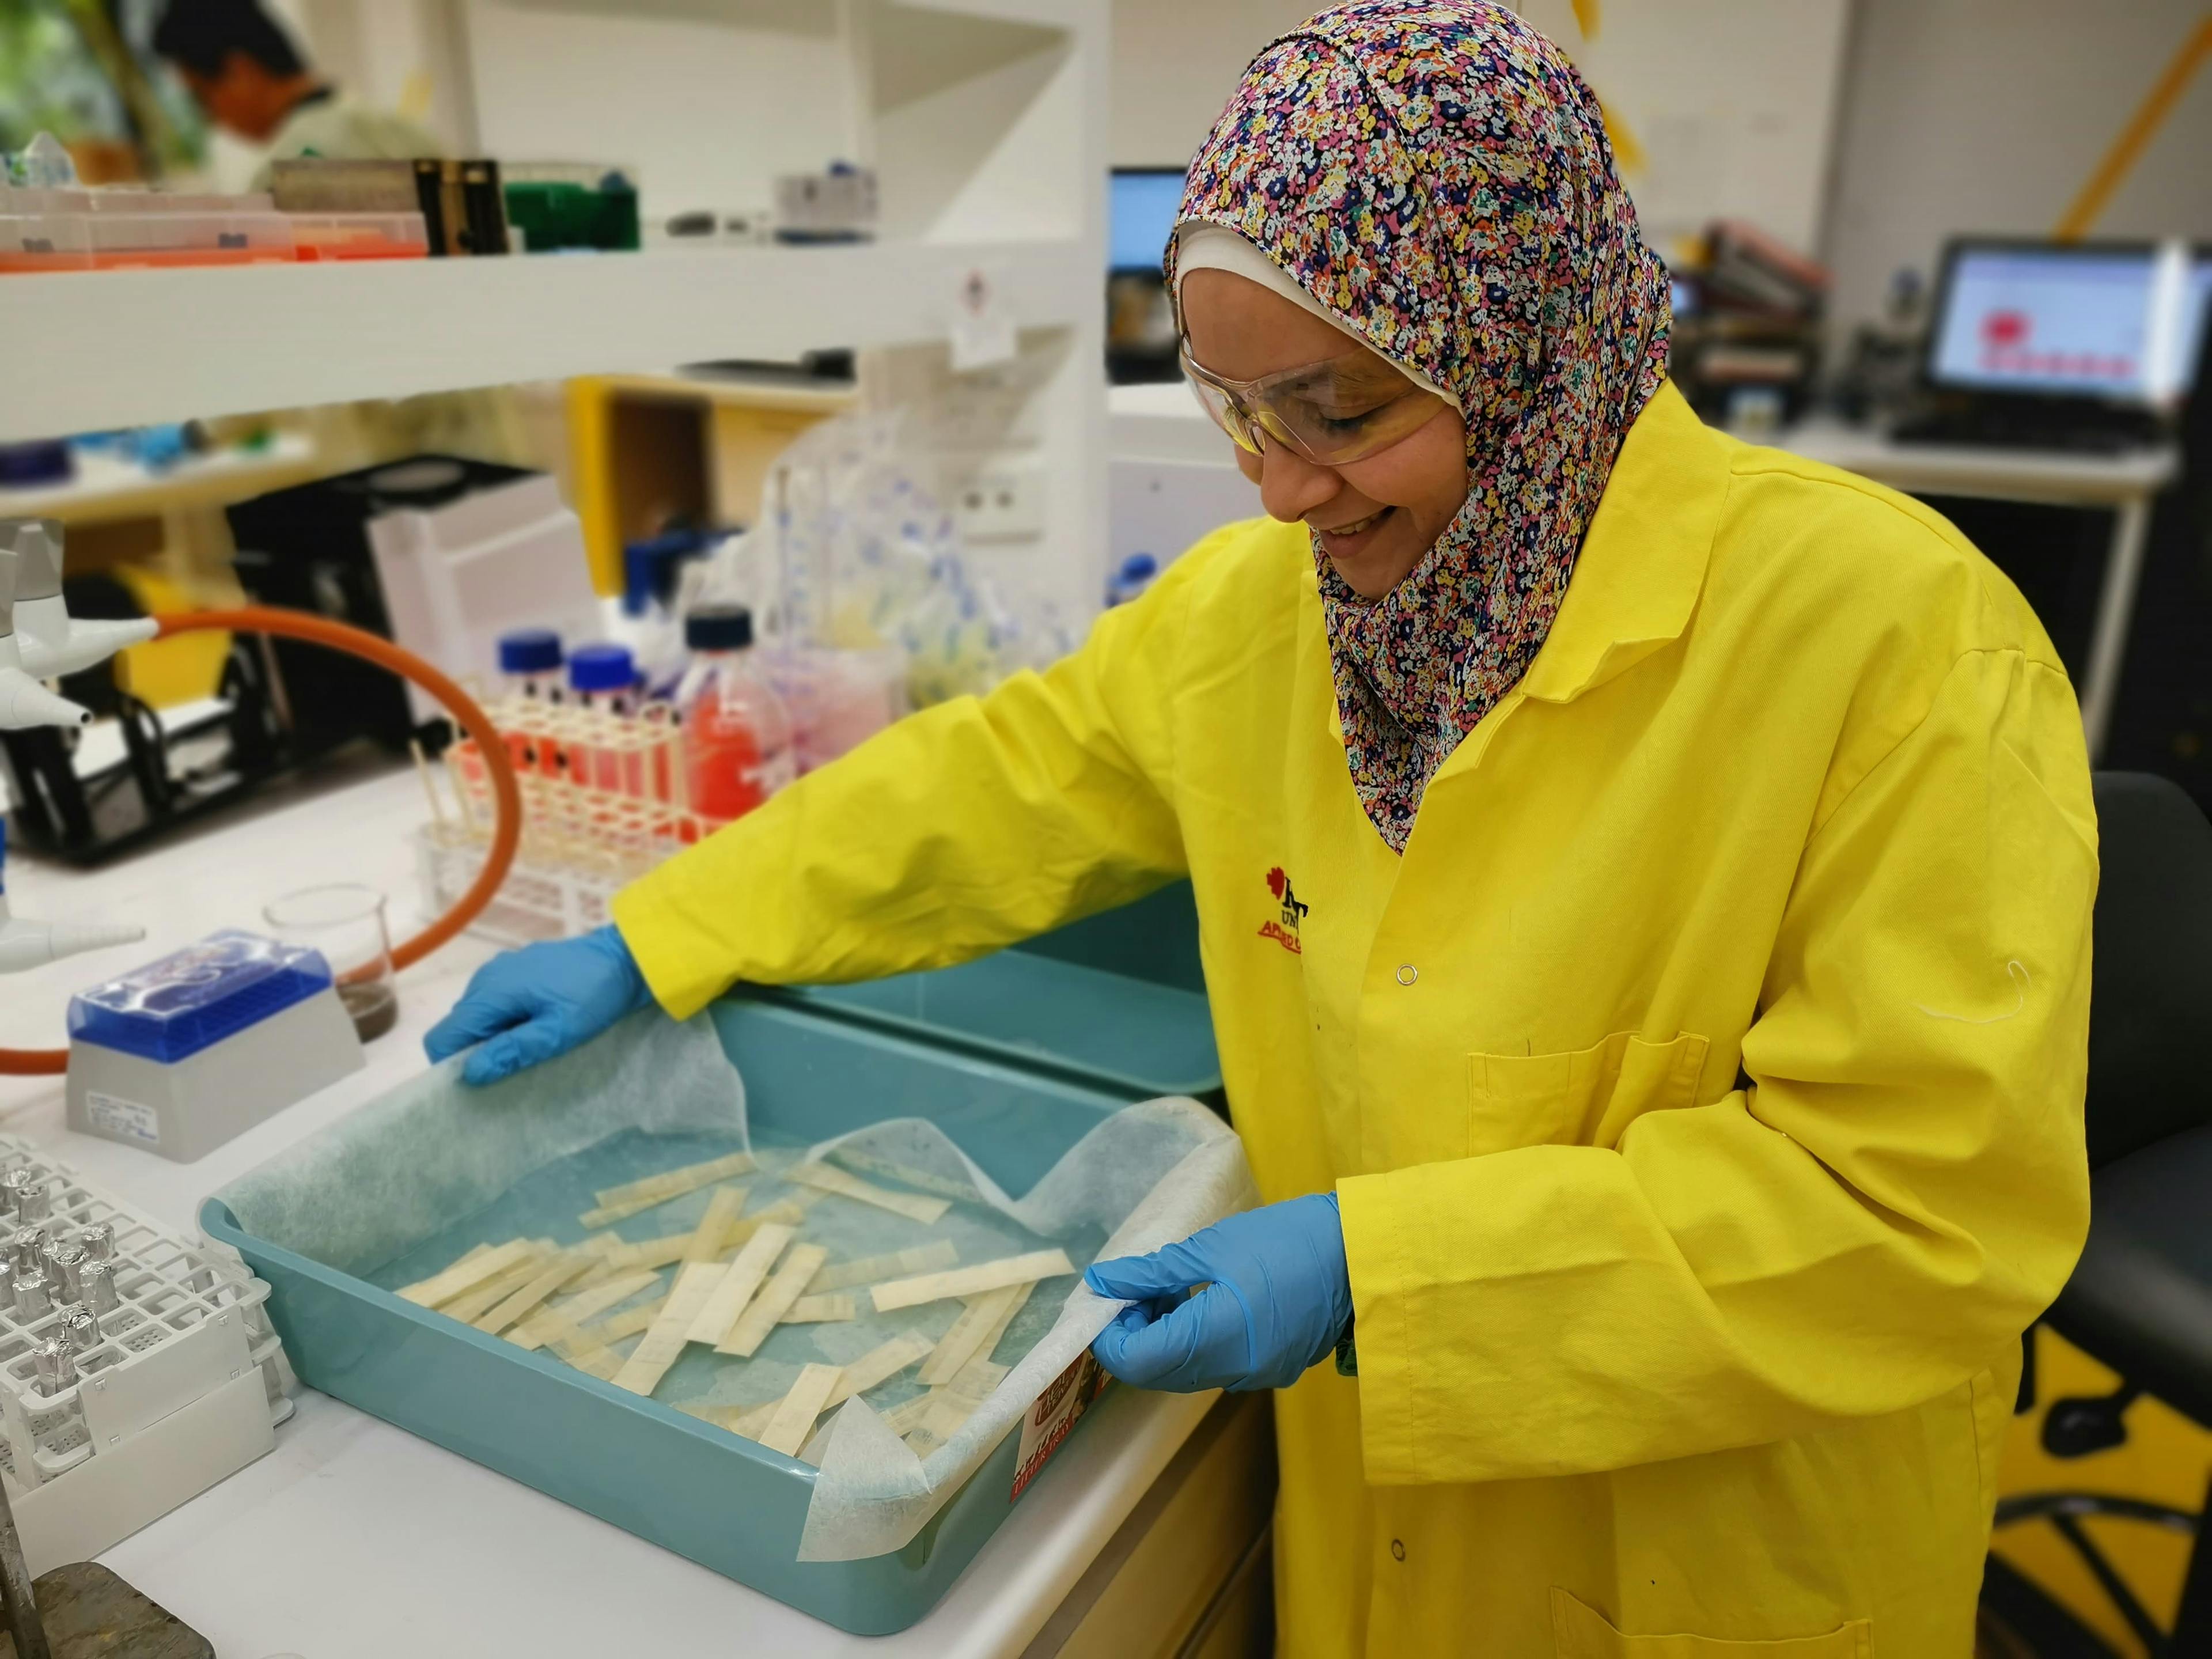 Arzak Mohamed handling fragile papyrus during her work. To analyze the papyrus, she uses X-ray fluorescence spectroscopy and scanning electron microscopy with energy-dispersive X-ray spectroscopy (SEM-EDS). Image Credit: Arzak Mohamed.